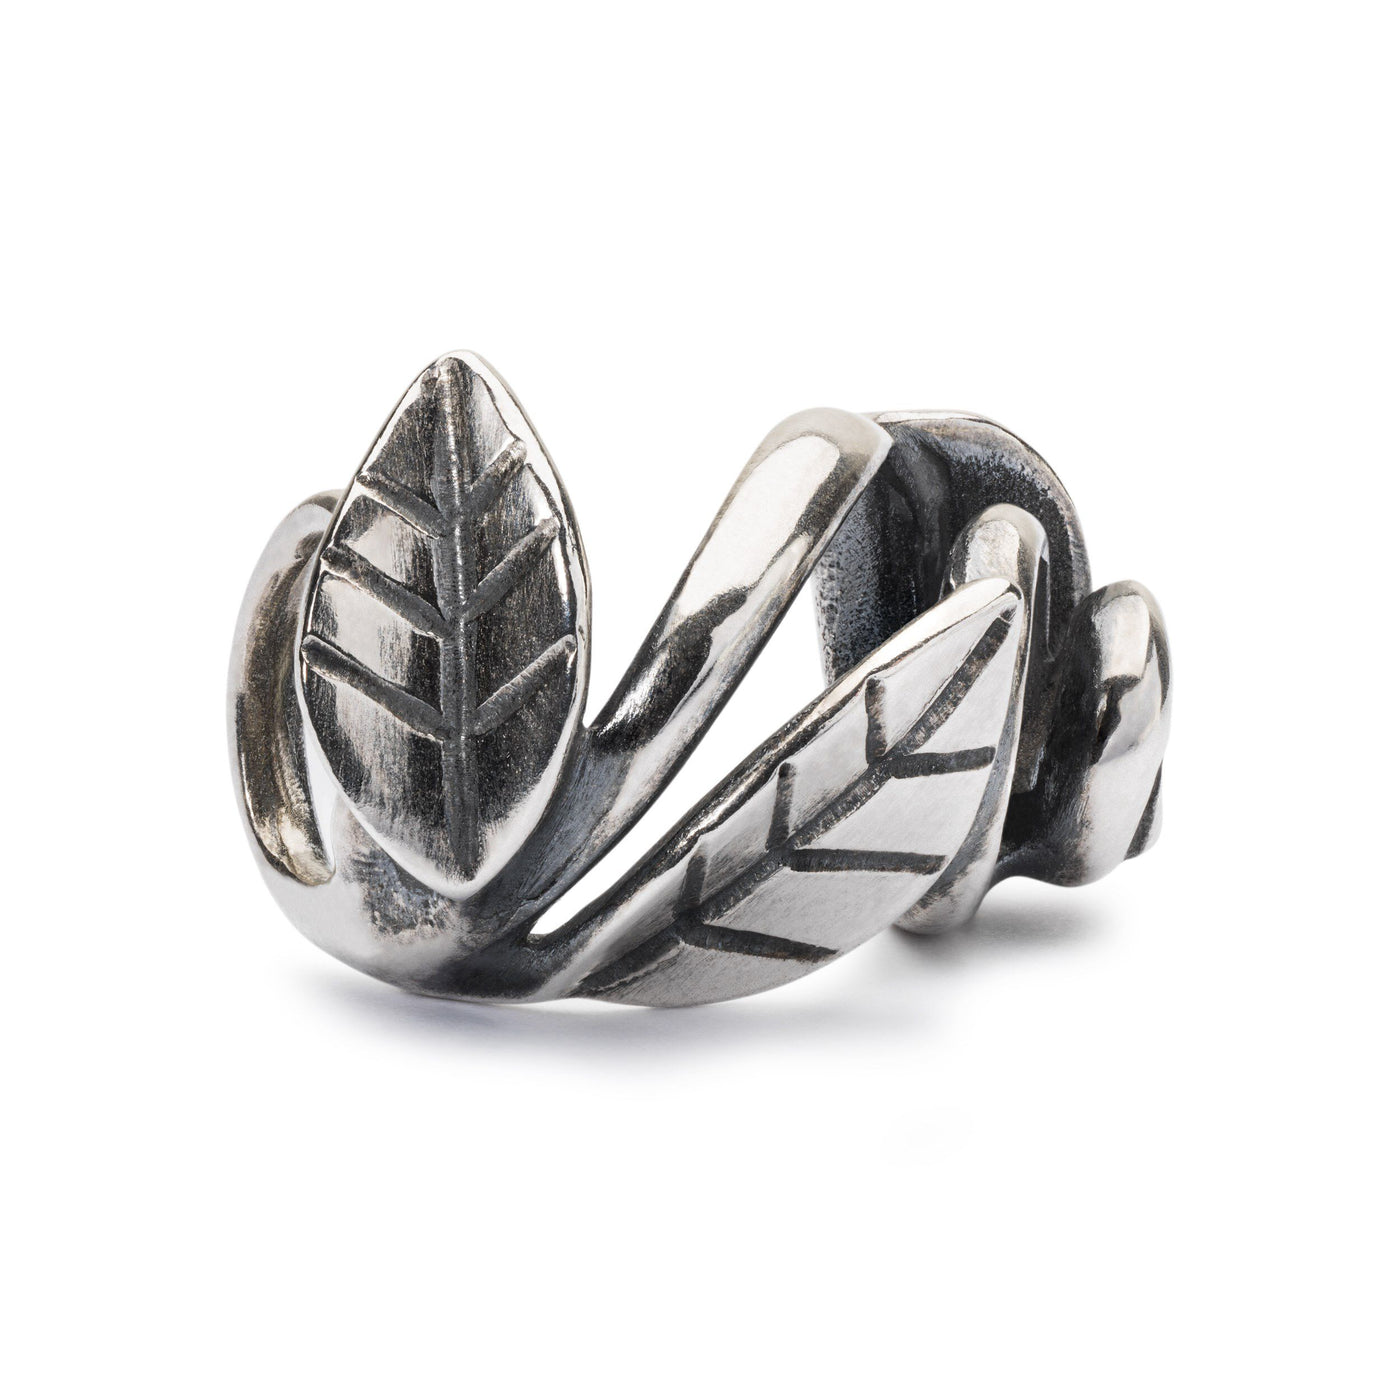 Framed by Nature - Trollbeads Canada